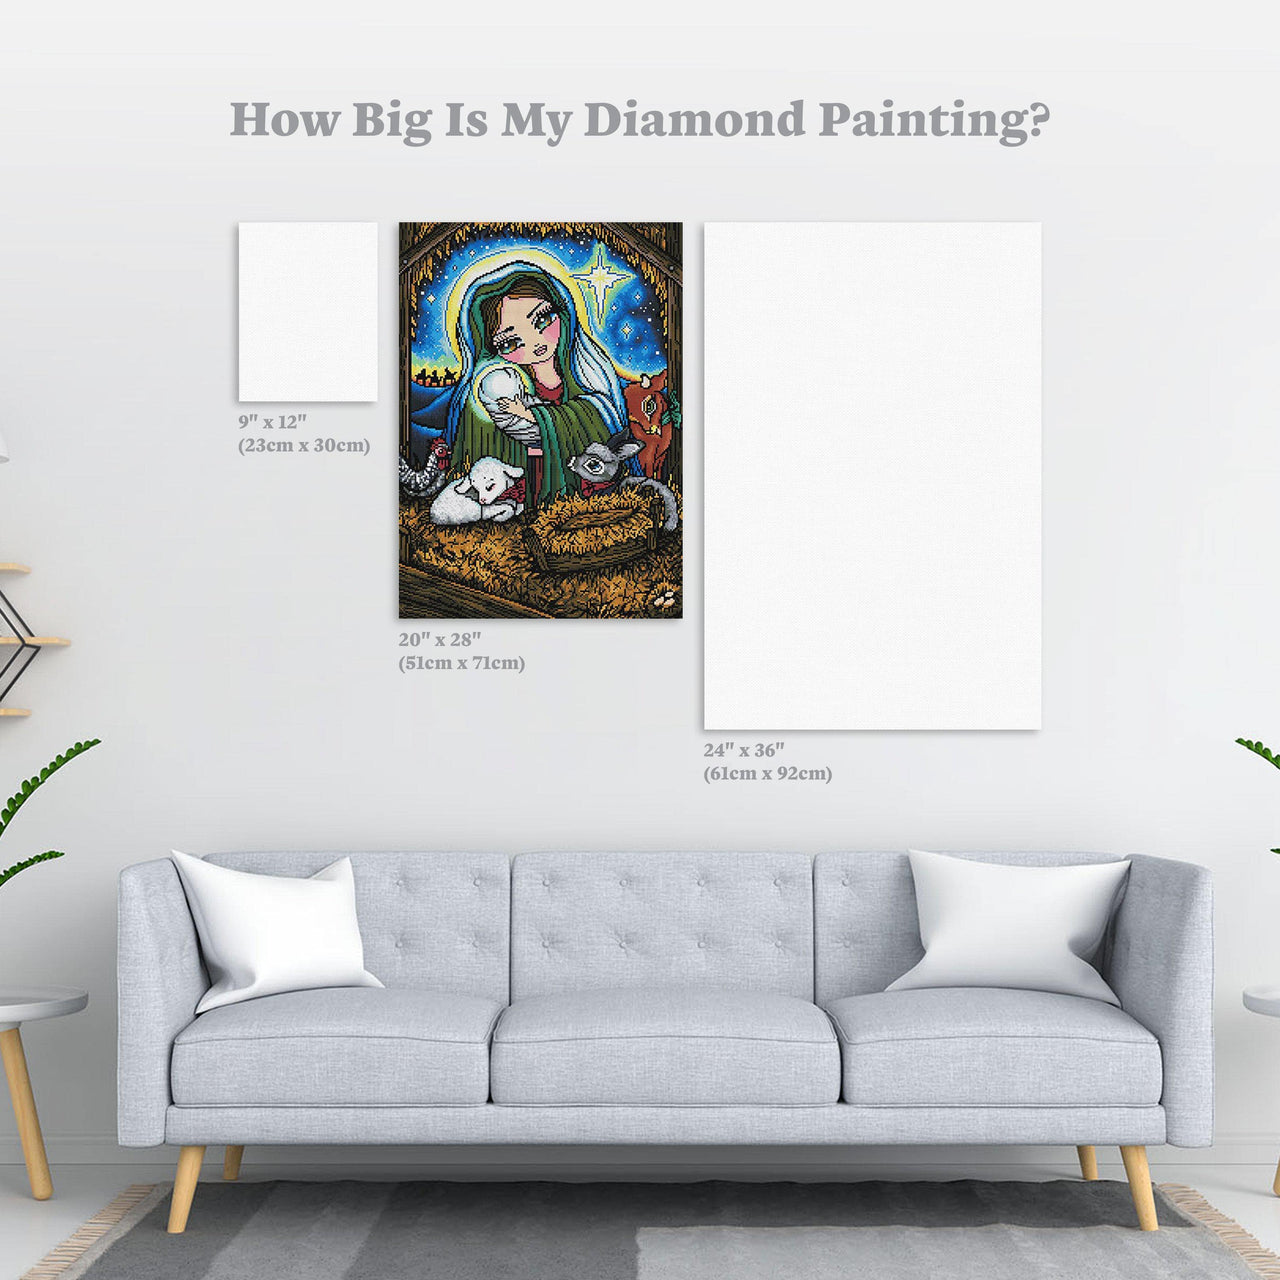 Diamond Painting A Savior is Born 20" x 28″ (51cm x 71cm) / Round with 49 Colors including 2 ABs / 45,356